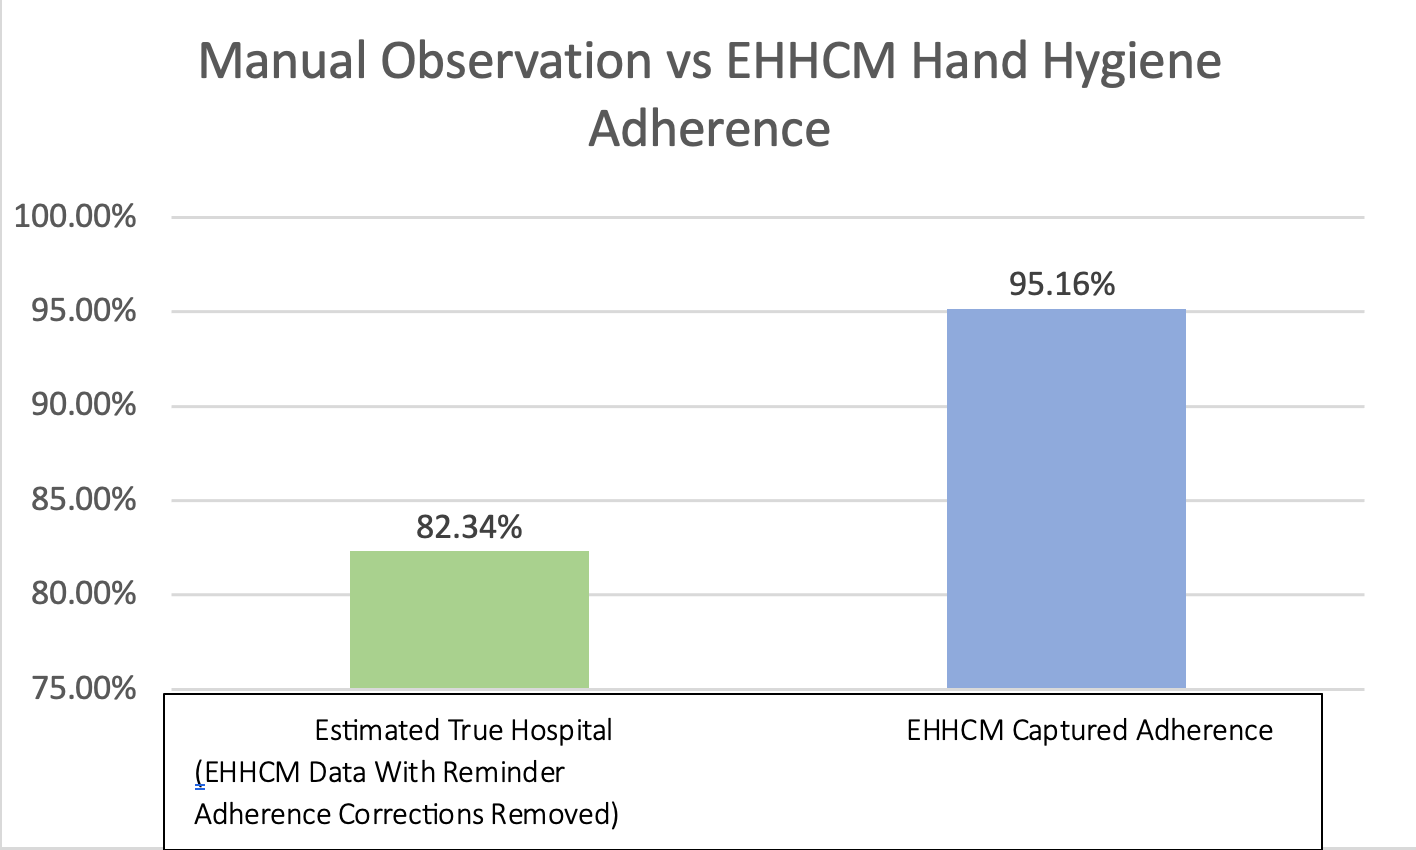 Figure 1: Manual Observation vs EHHCM Hand Hygiene Adherence

(Credit: author) 